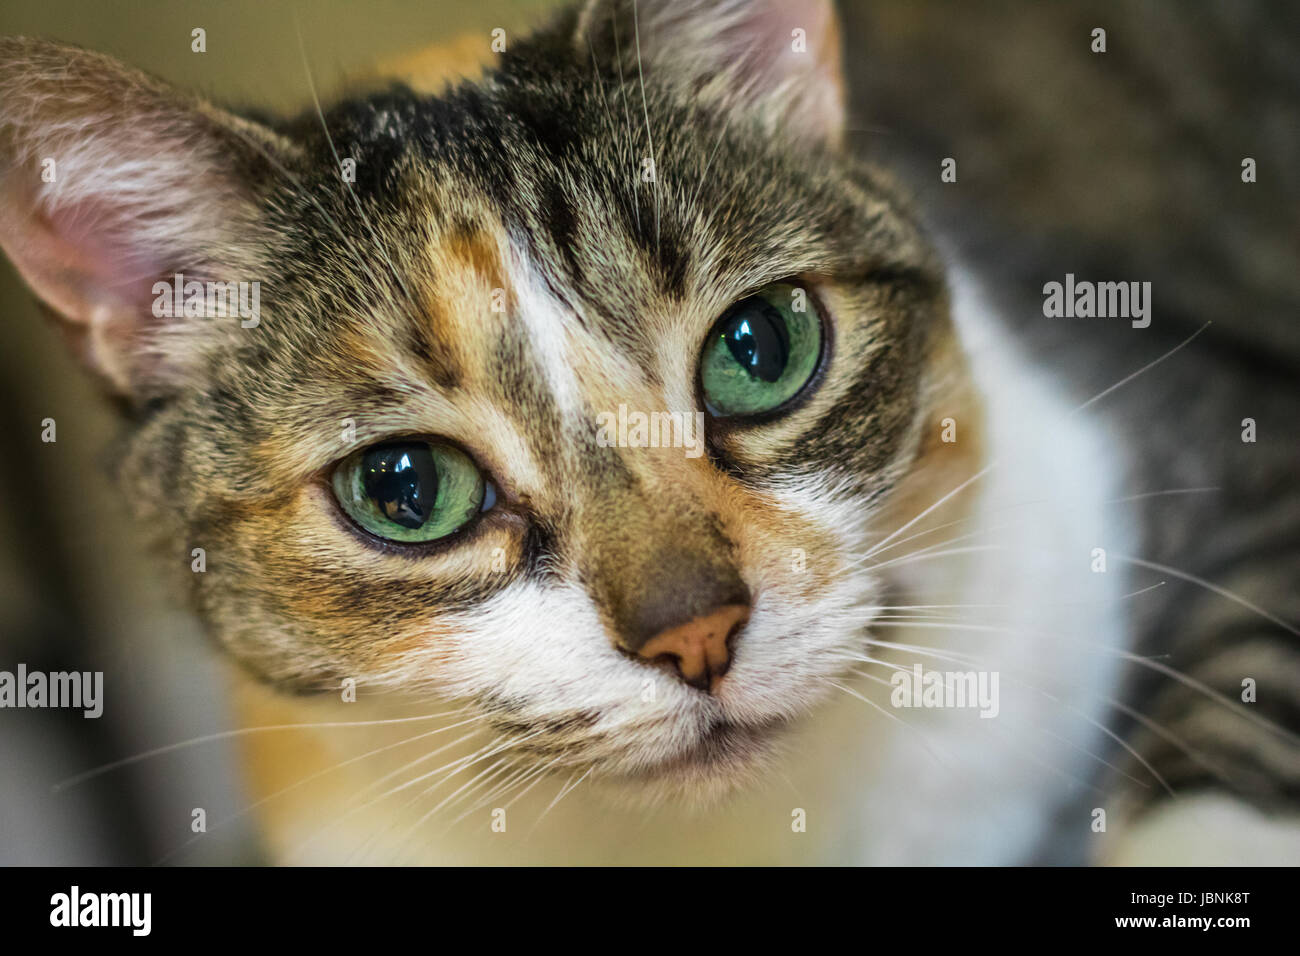 Horizontal closeup photo of a calico cat's face with bright green eyes Stock Photo